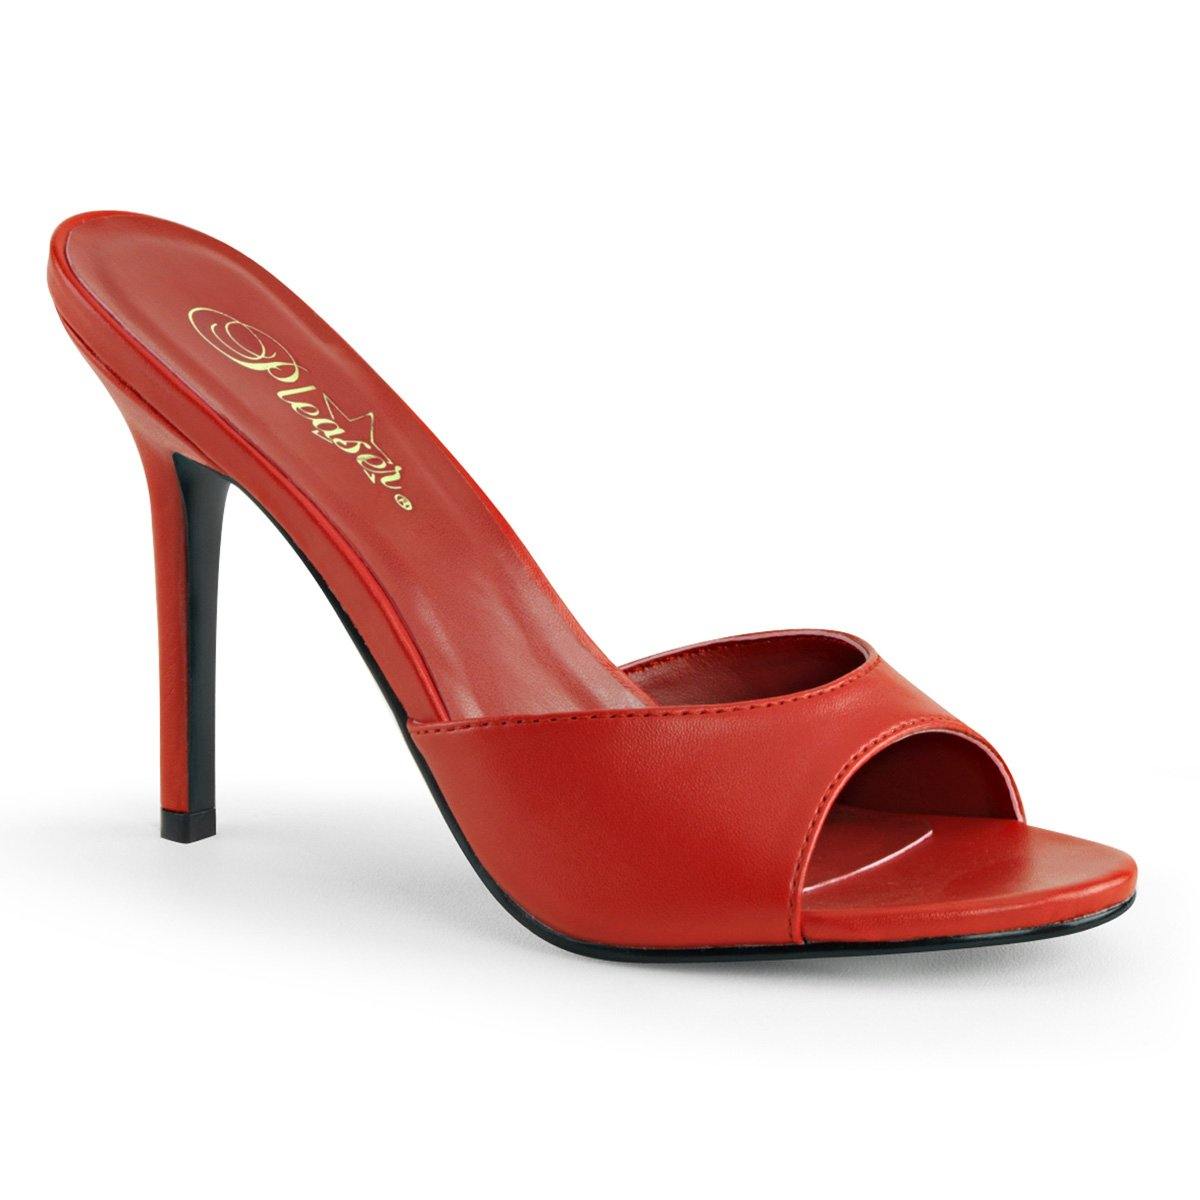 The Hot Girl Peep Toe Mule in Red Faux Leather - pinupgirlclothing.com